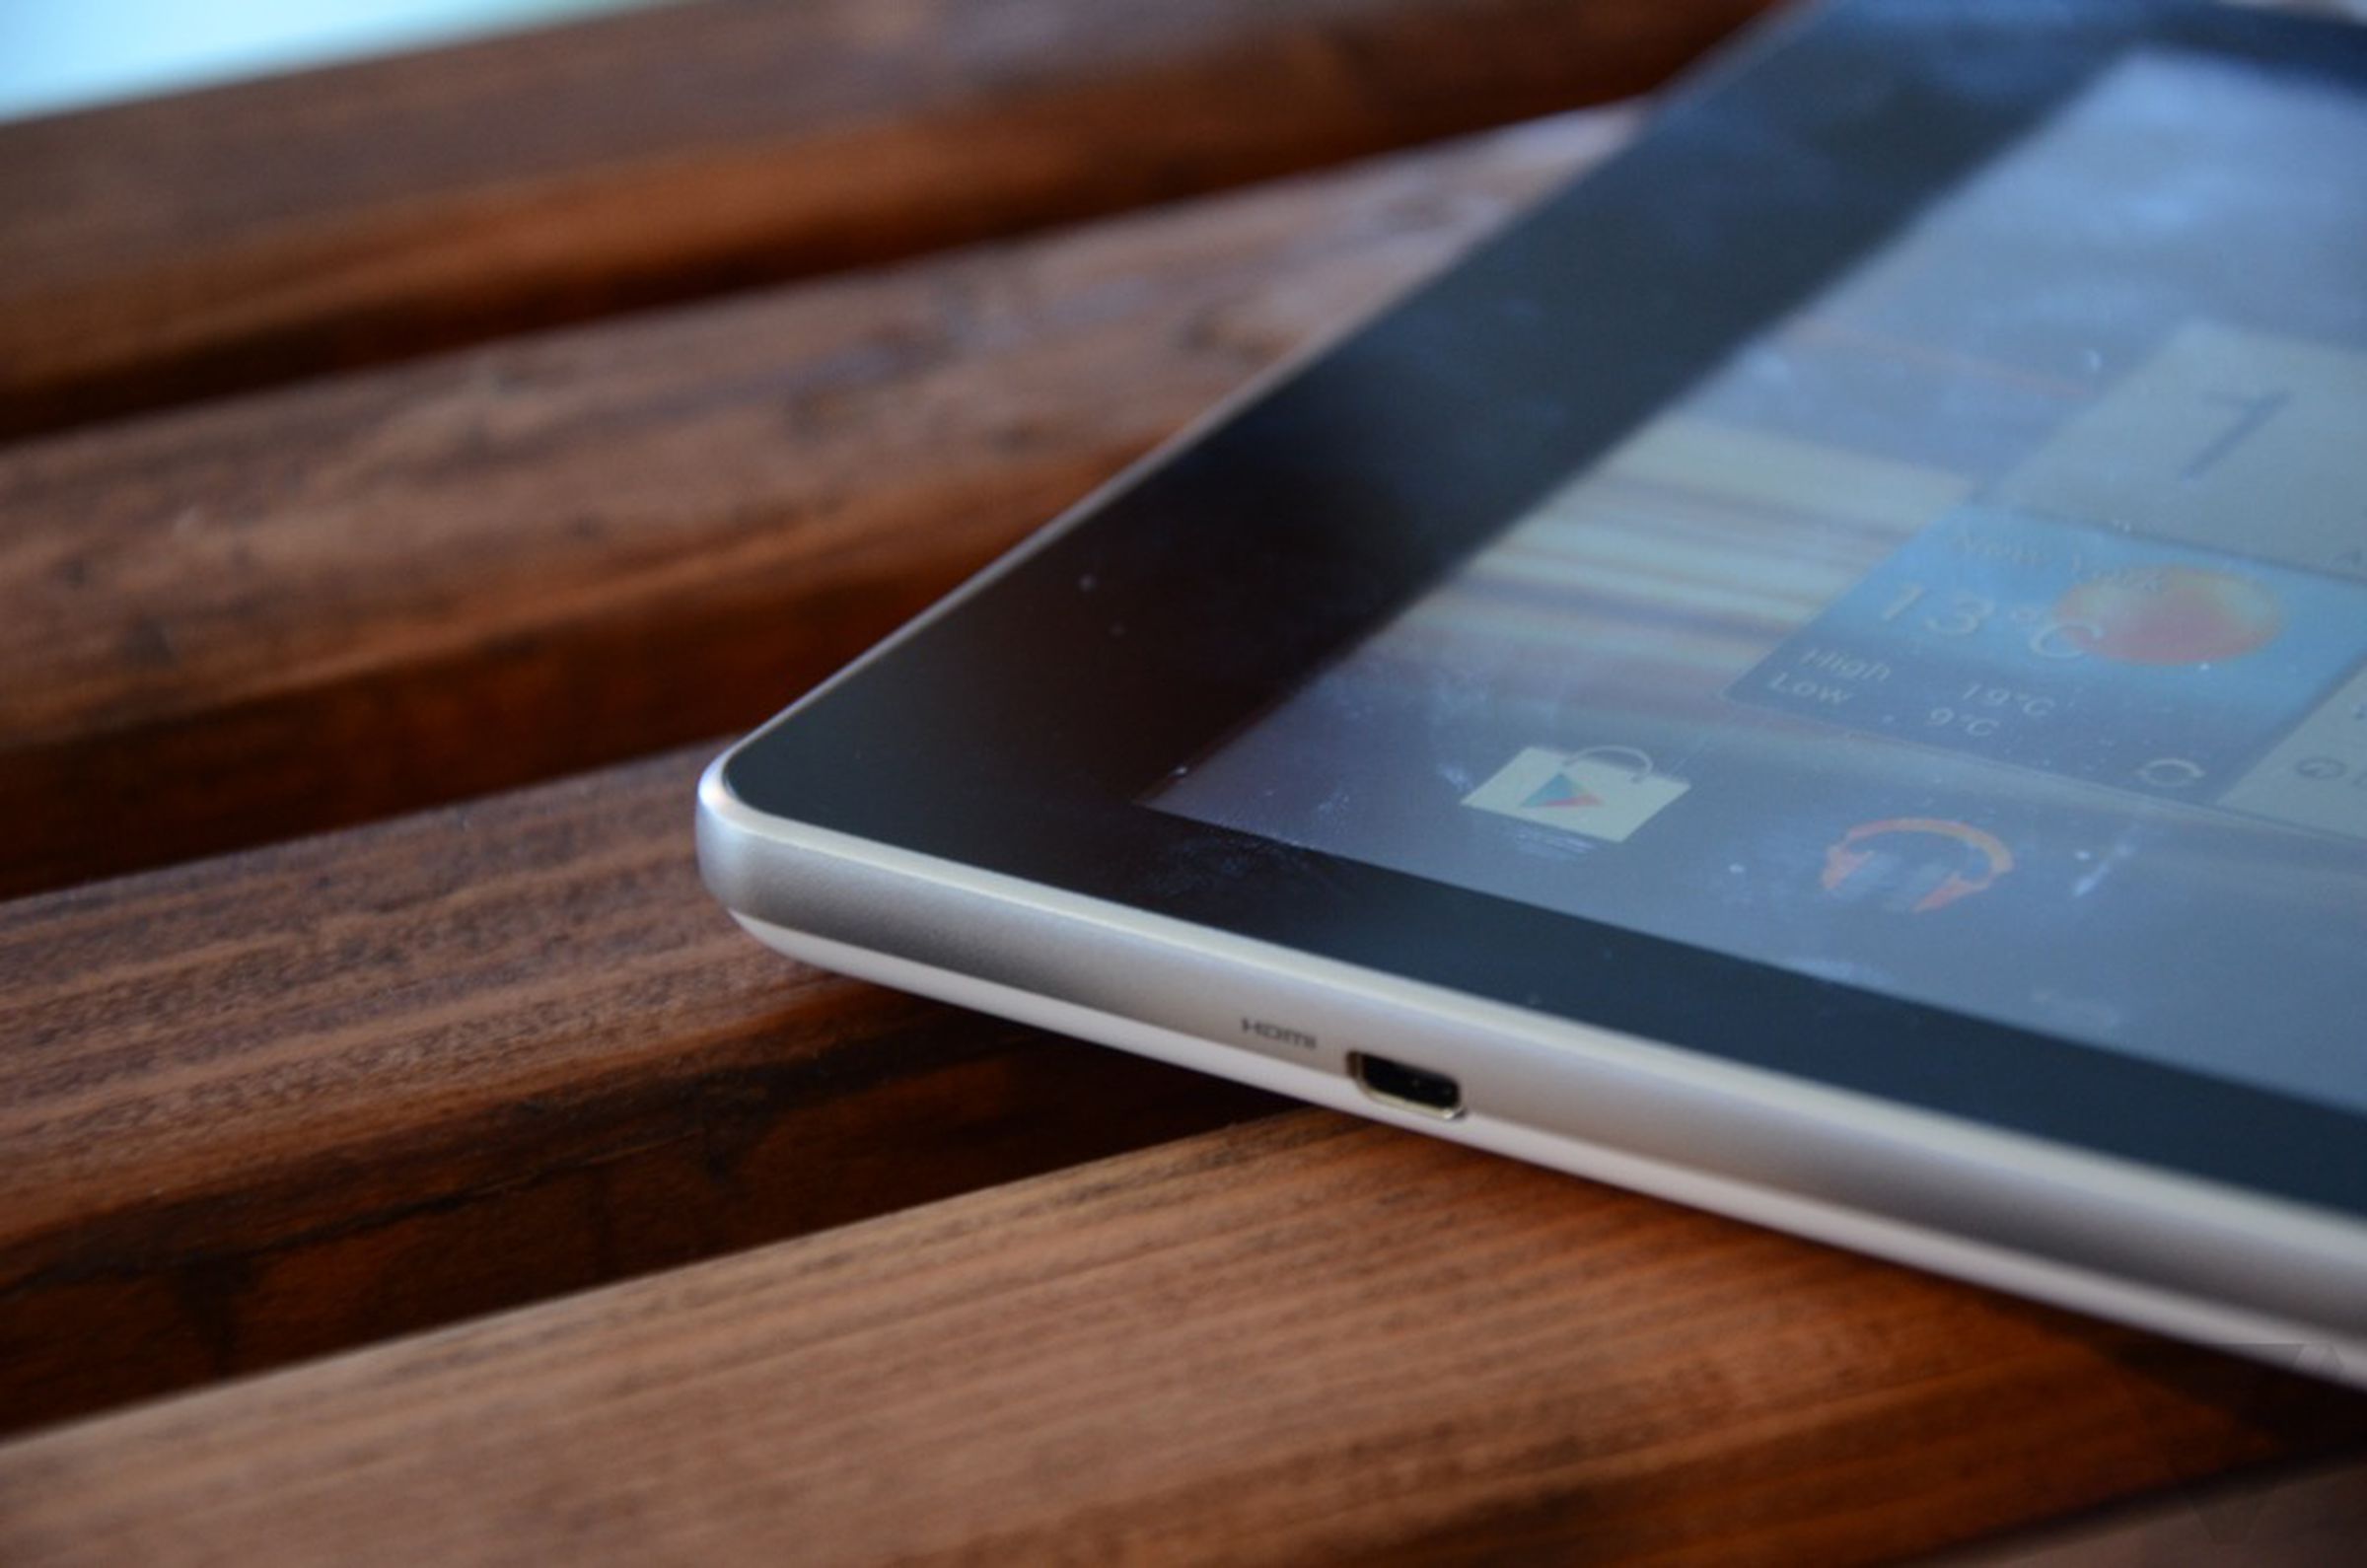 Acer Iconia A1 hands-on pictures